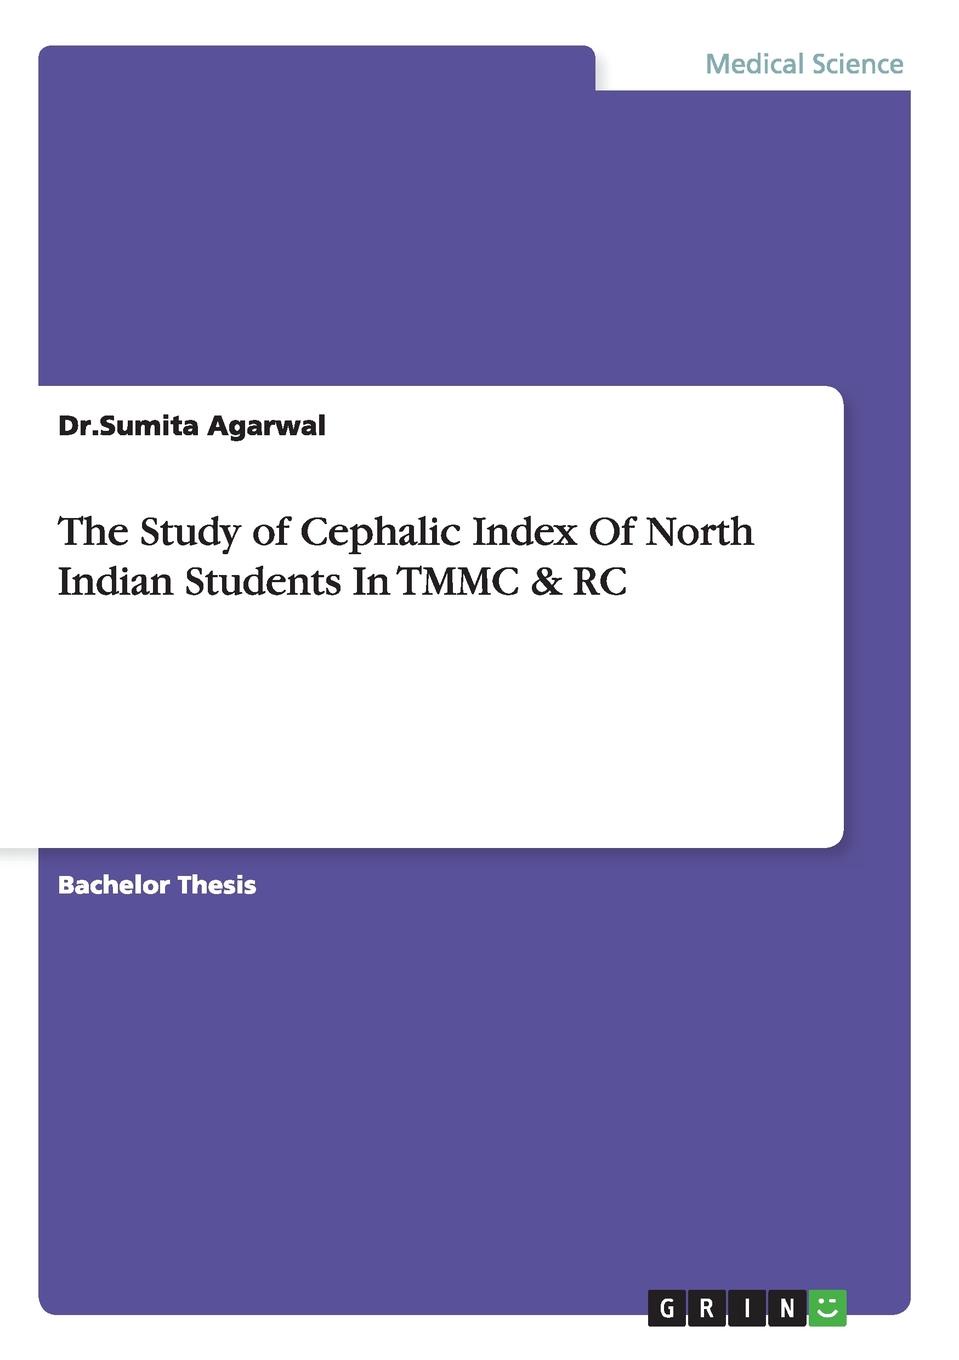 Dr.Sumita Agarwal The Study of Cephalic Index Of North Indian Students In TMMC . RC